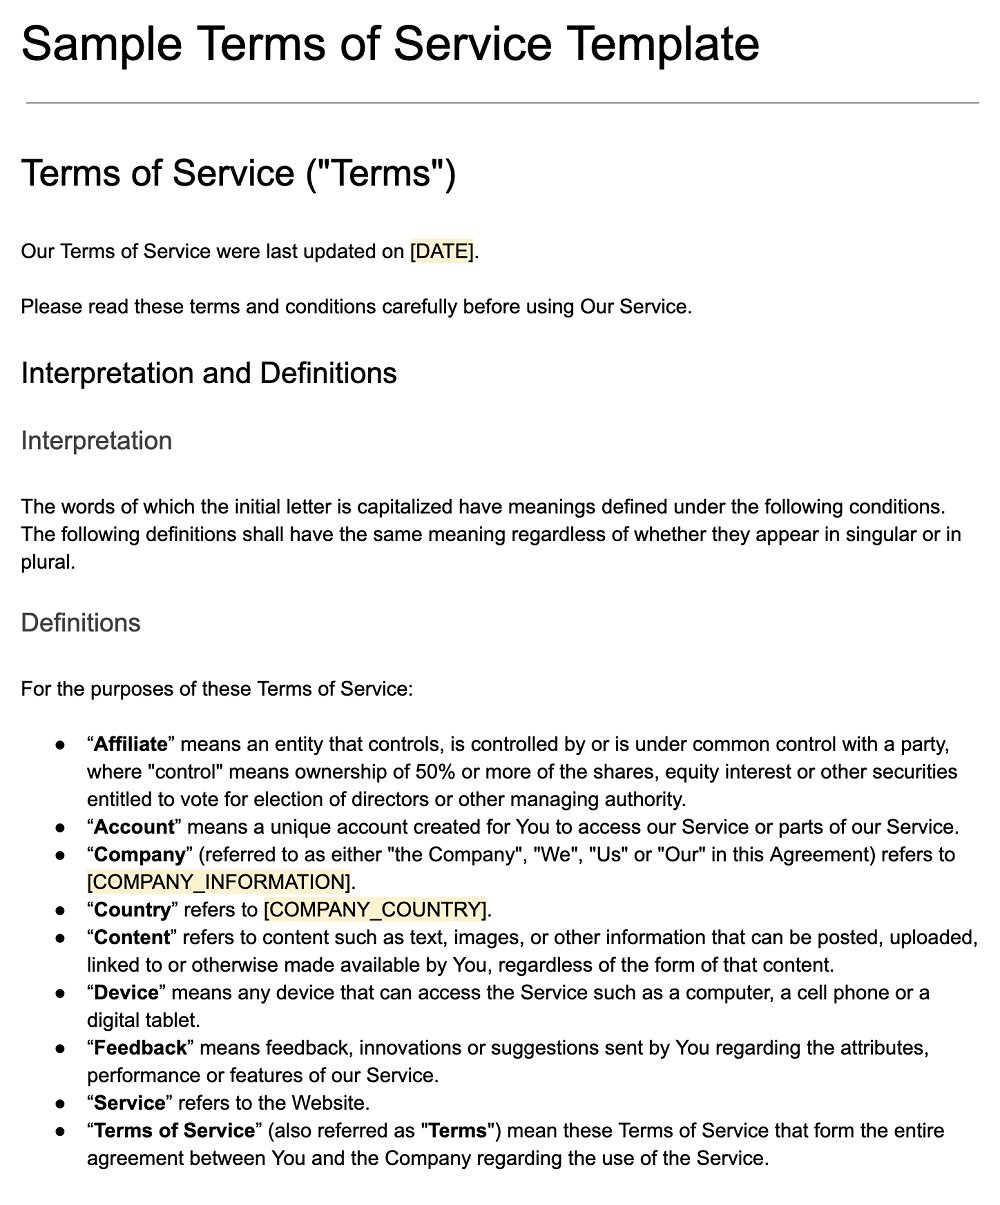 Screenshot of the Sample Terms of Service Template